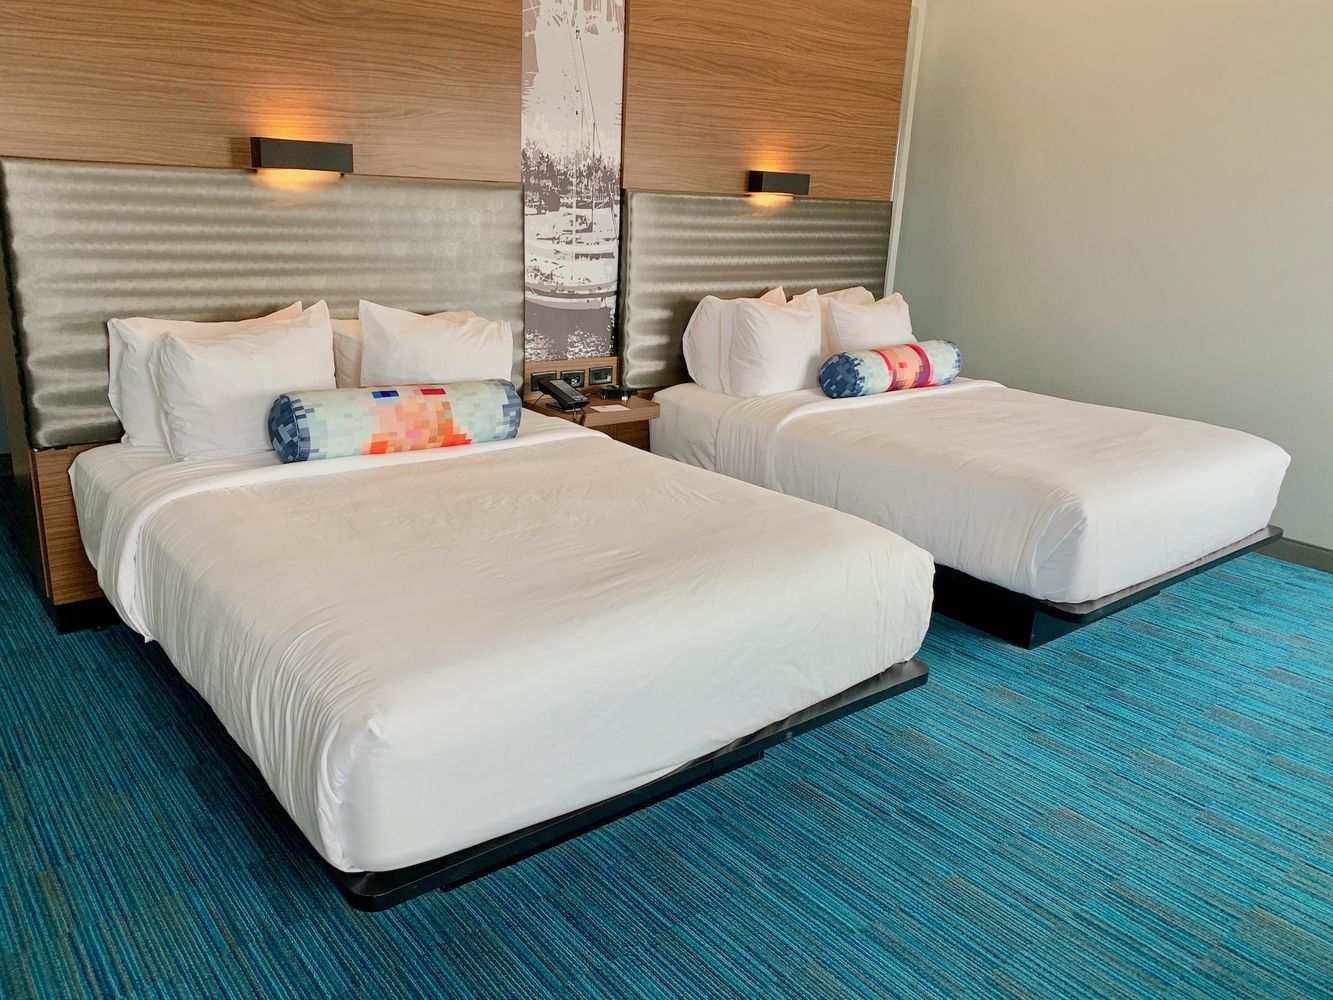 Two Queen beds at the Corpus Christi Aloft Hotel